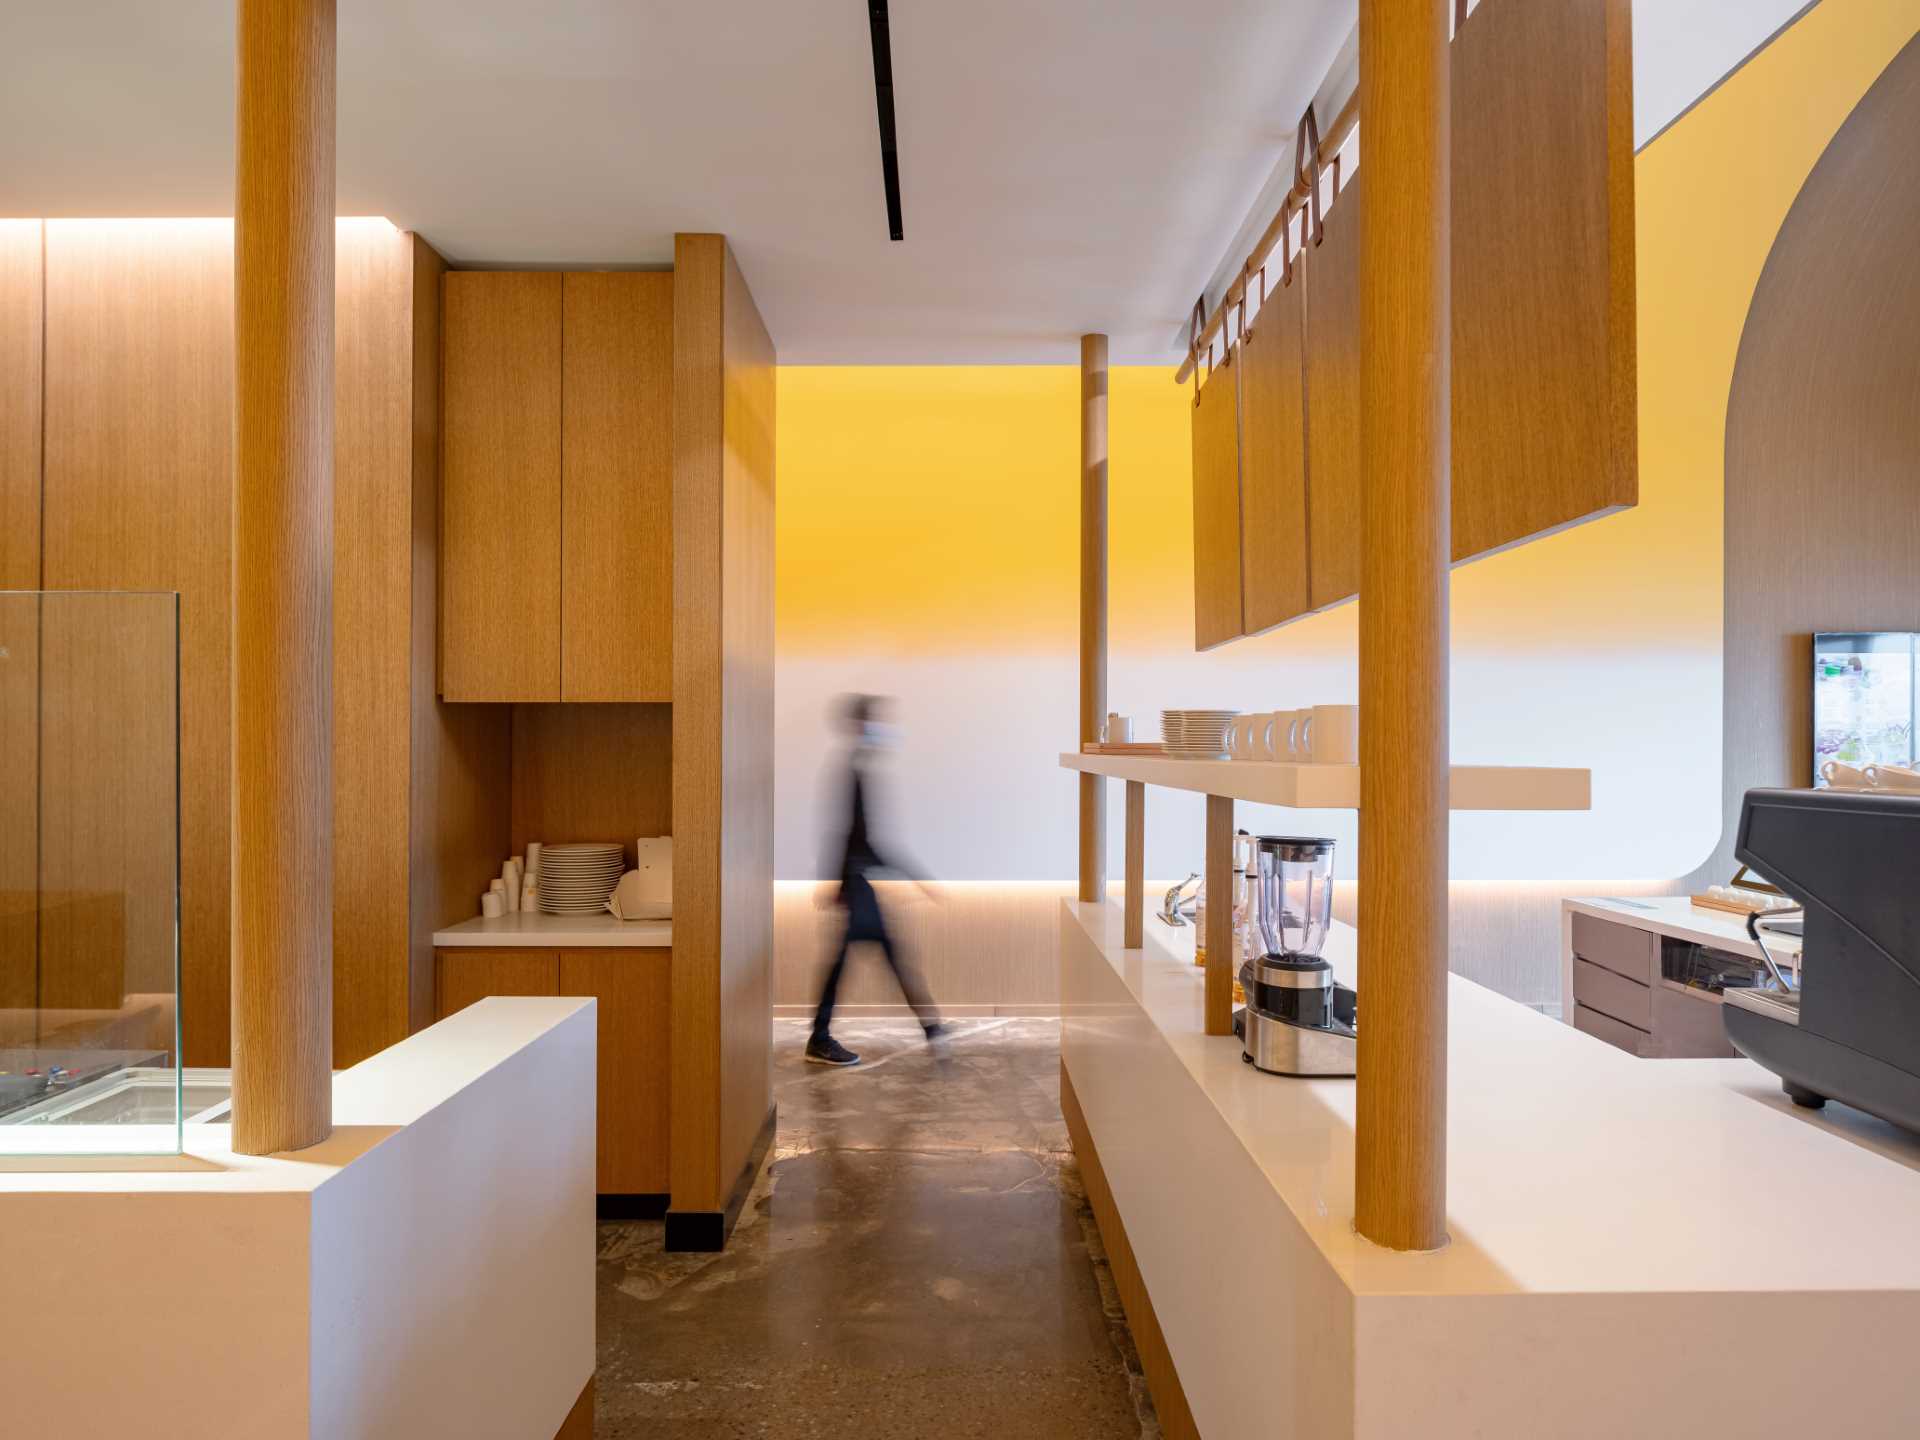 A modern cafe with an exposed kitchen and minimalist serving area.